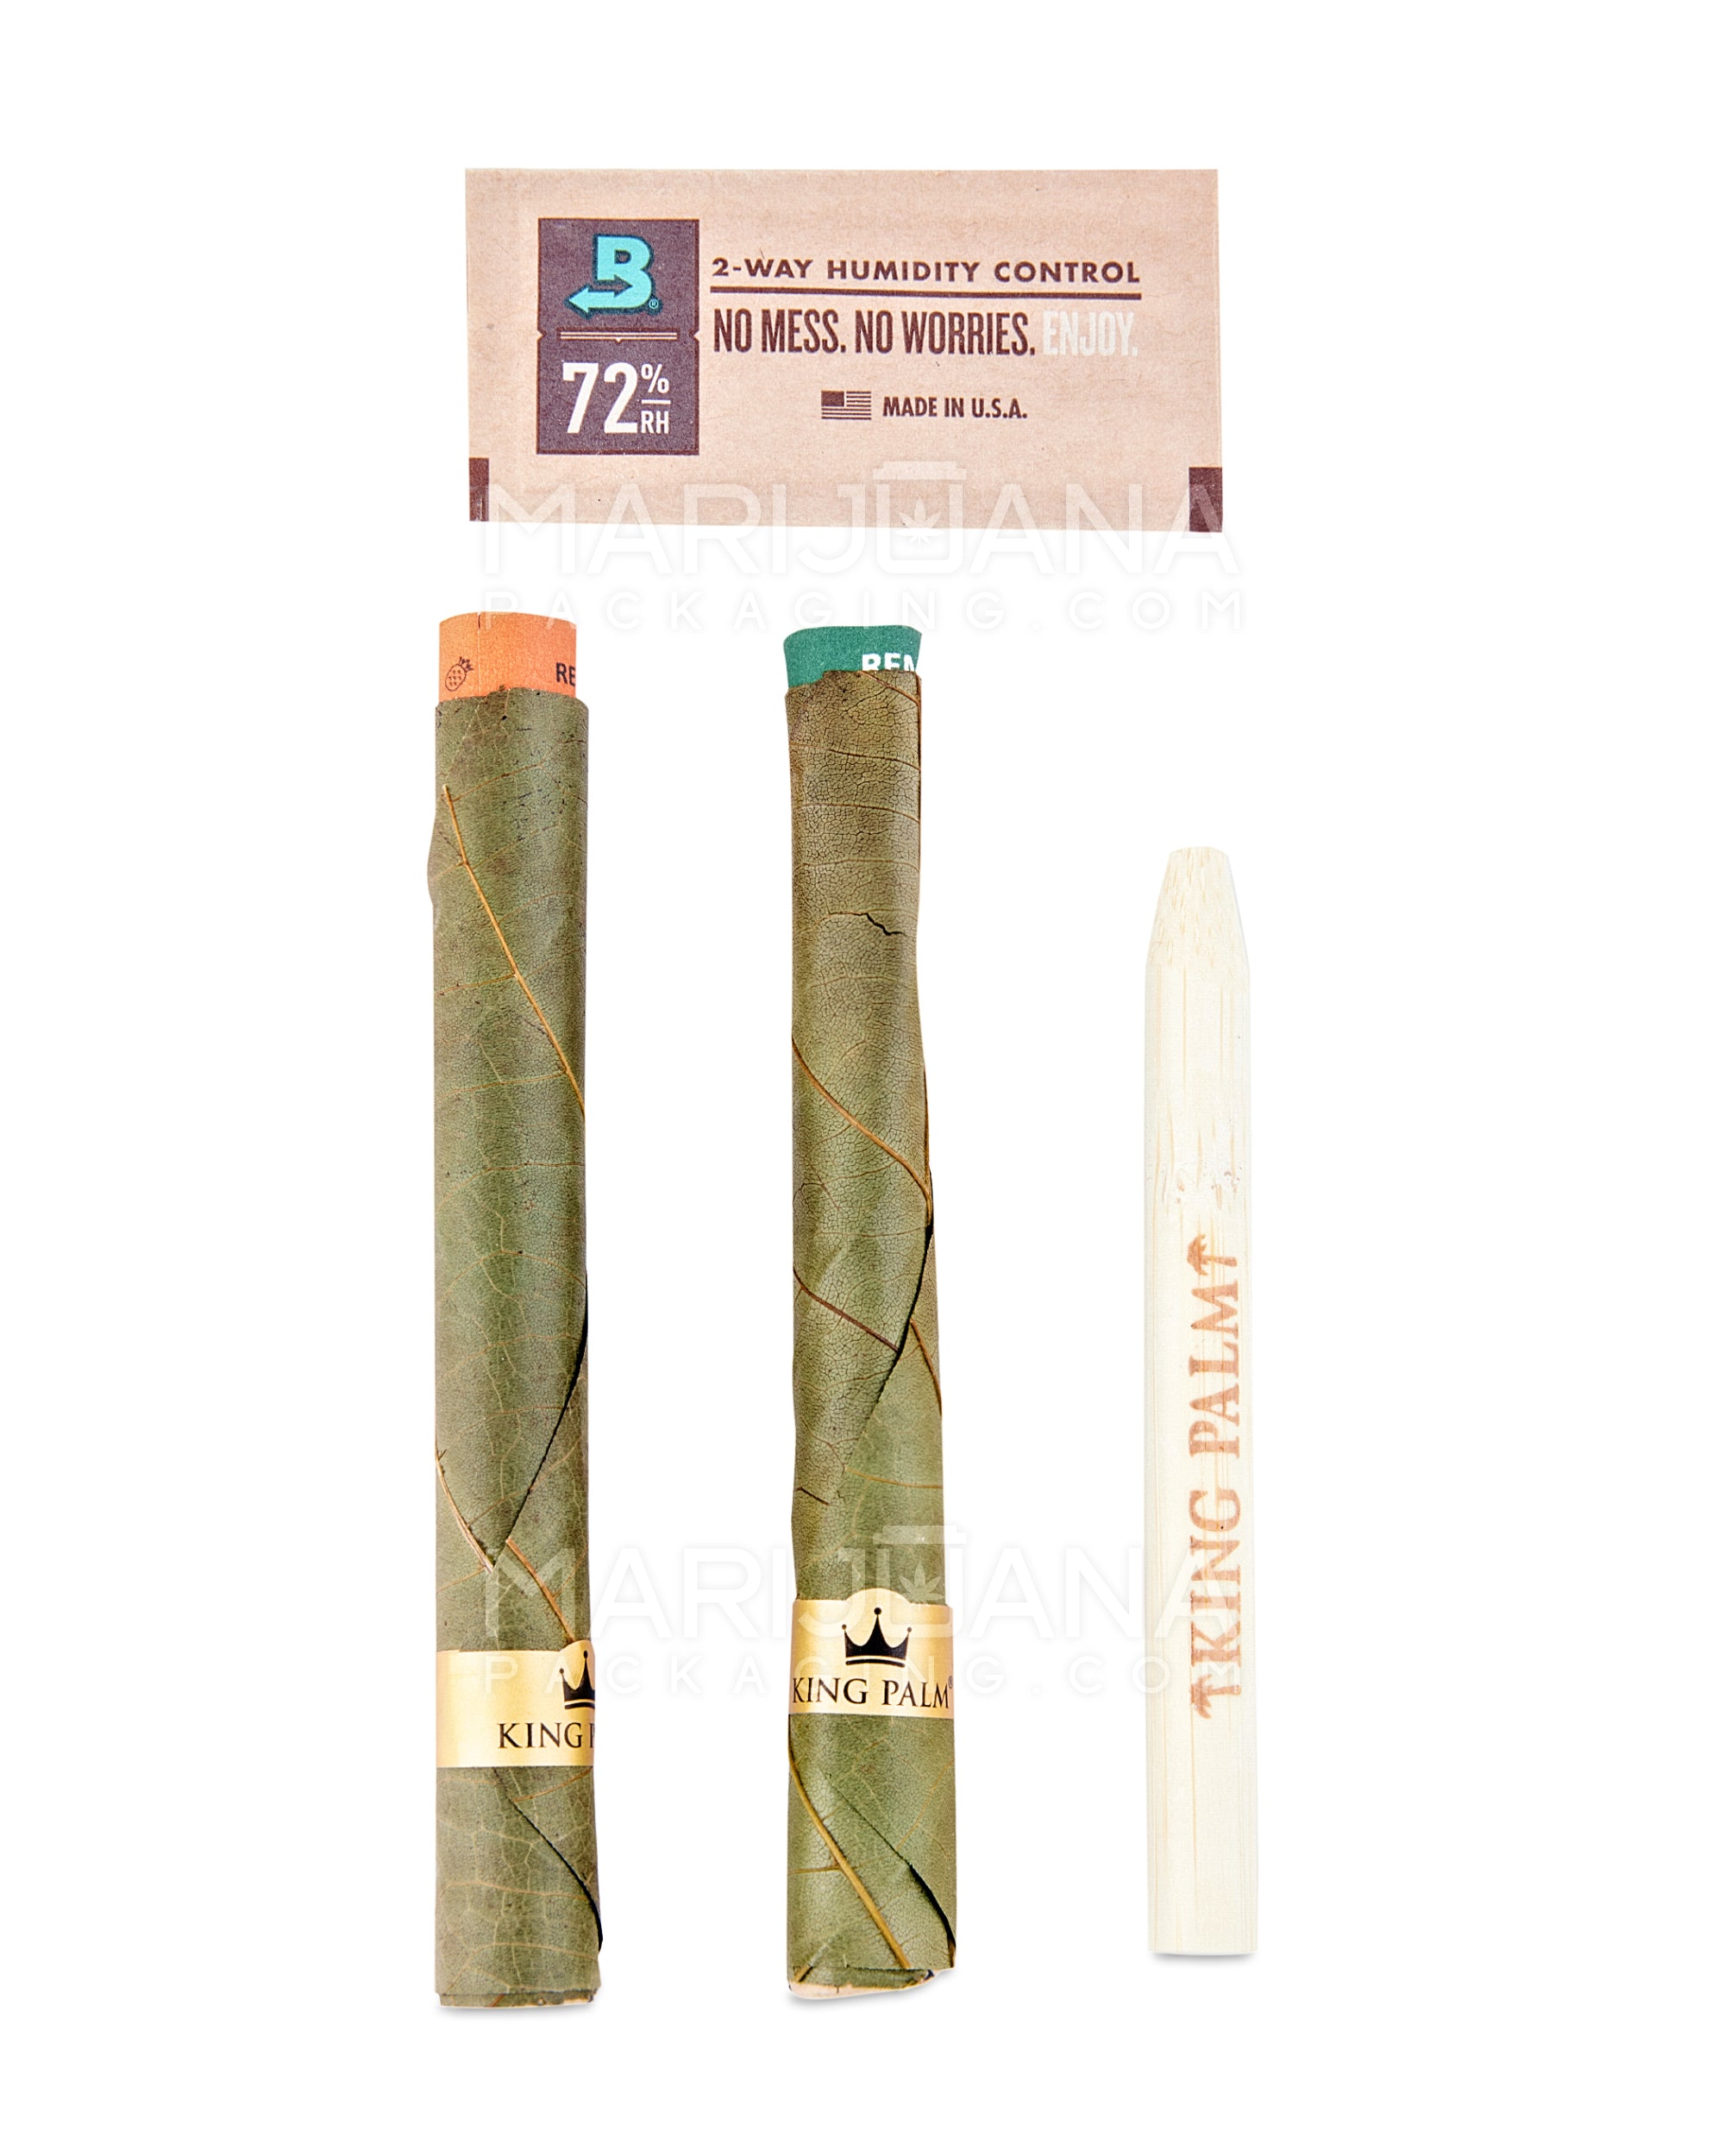 KING PALM | 'Retail Display' Green Natural Leaf Dual Blunt Wraps | 104mm - Pine Drip/Watermelon - 20 Count